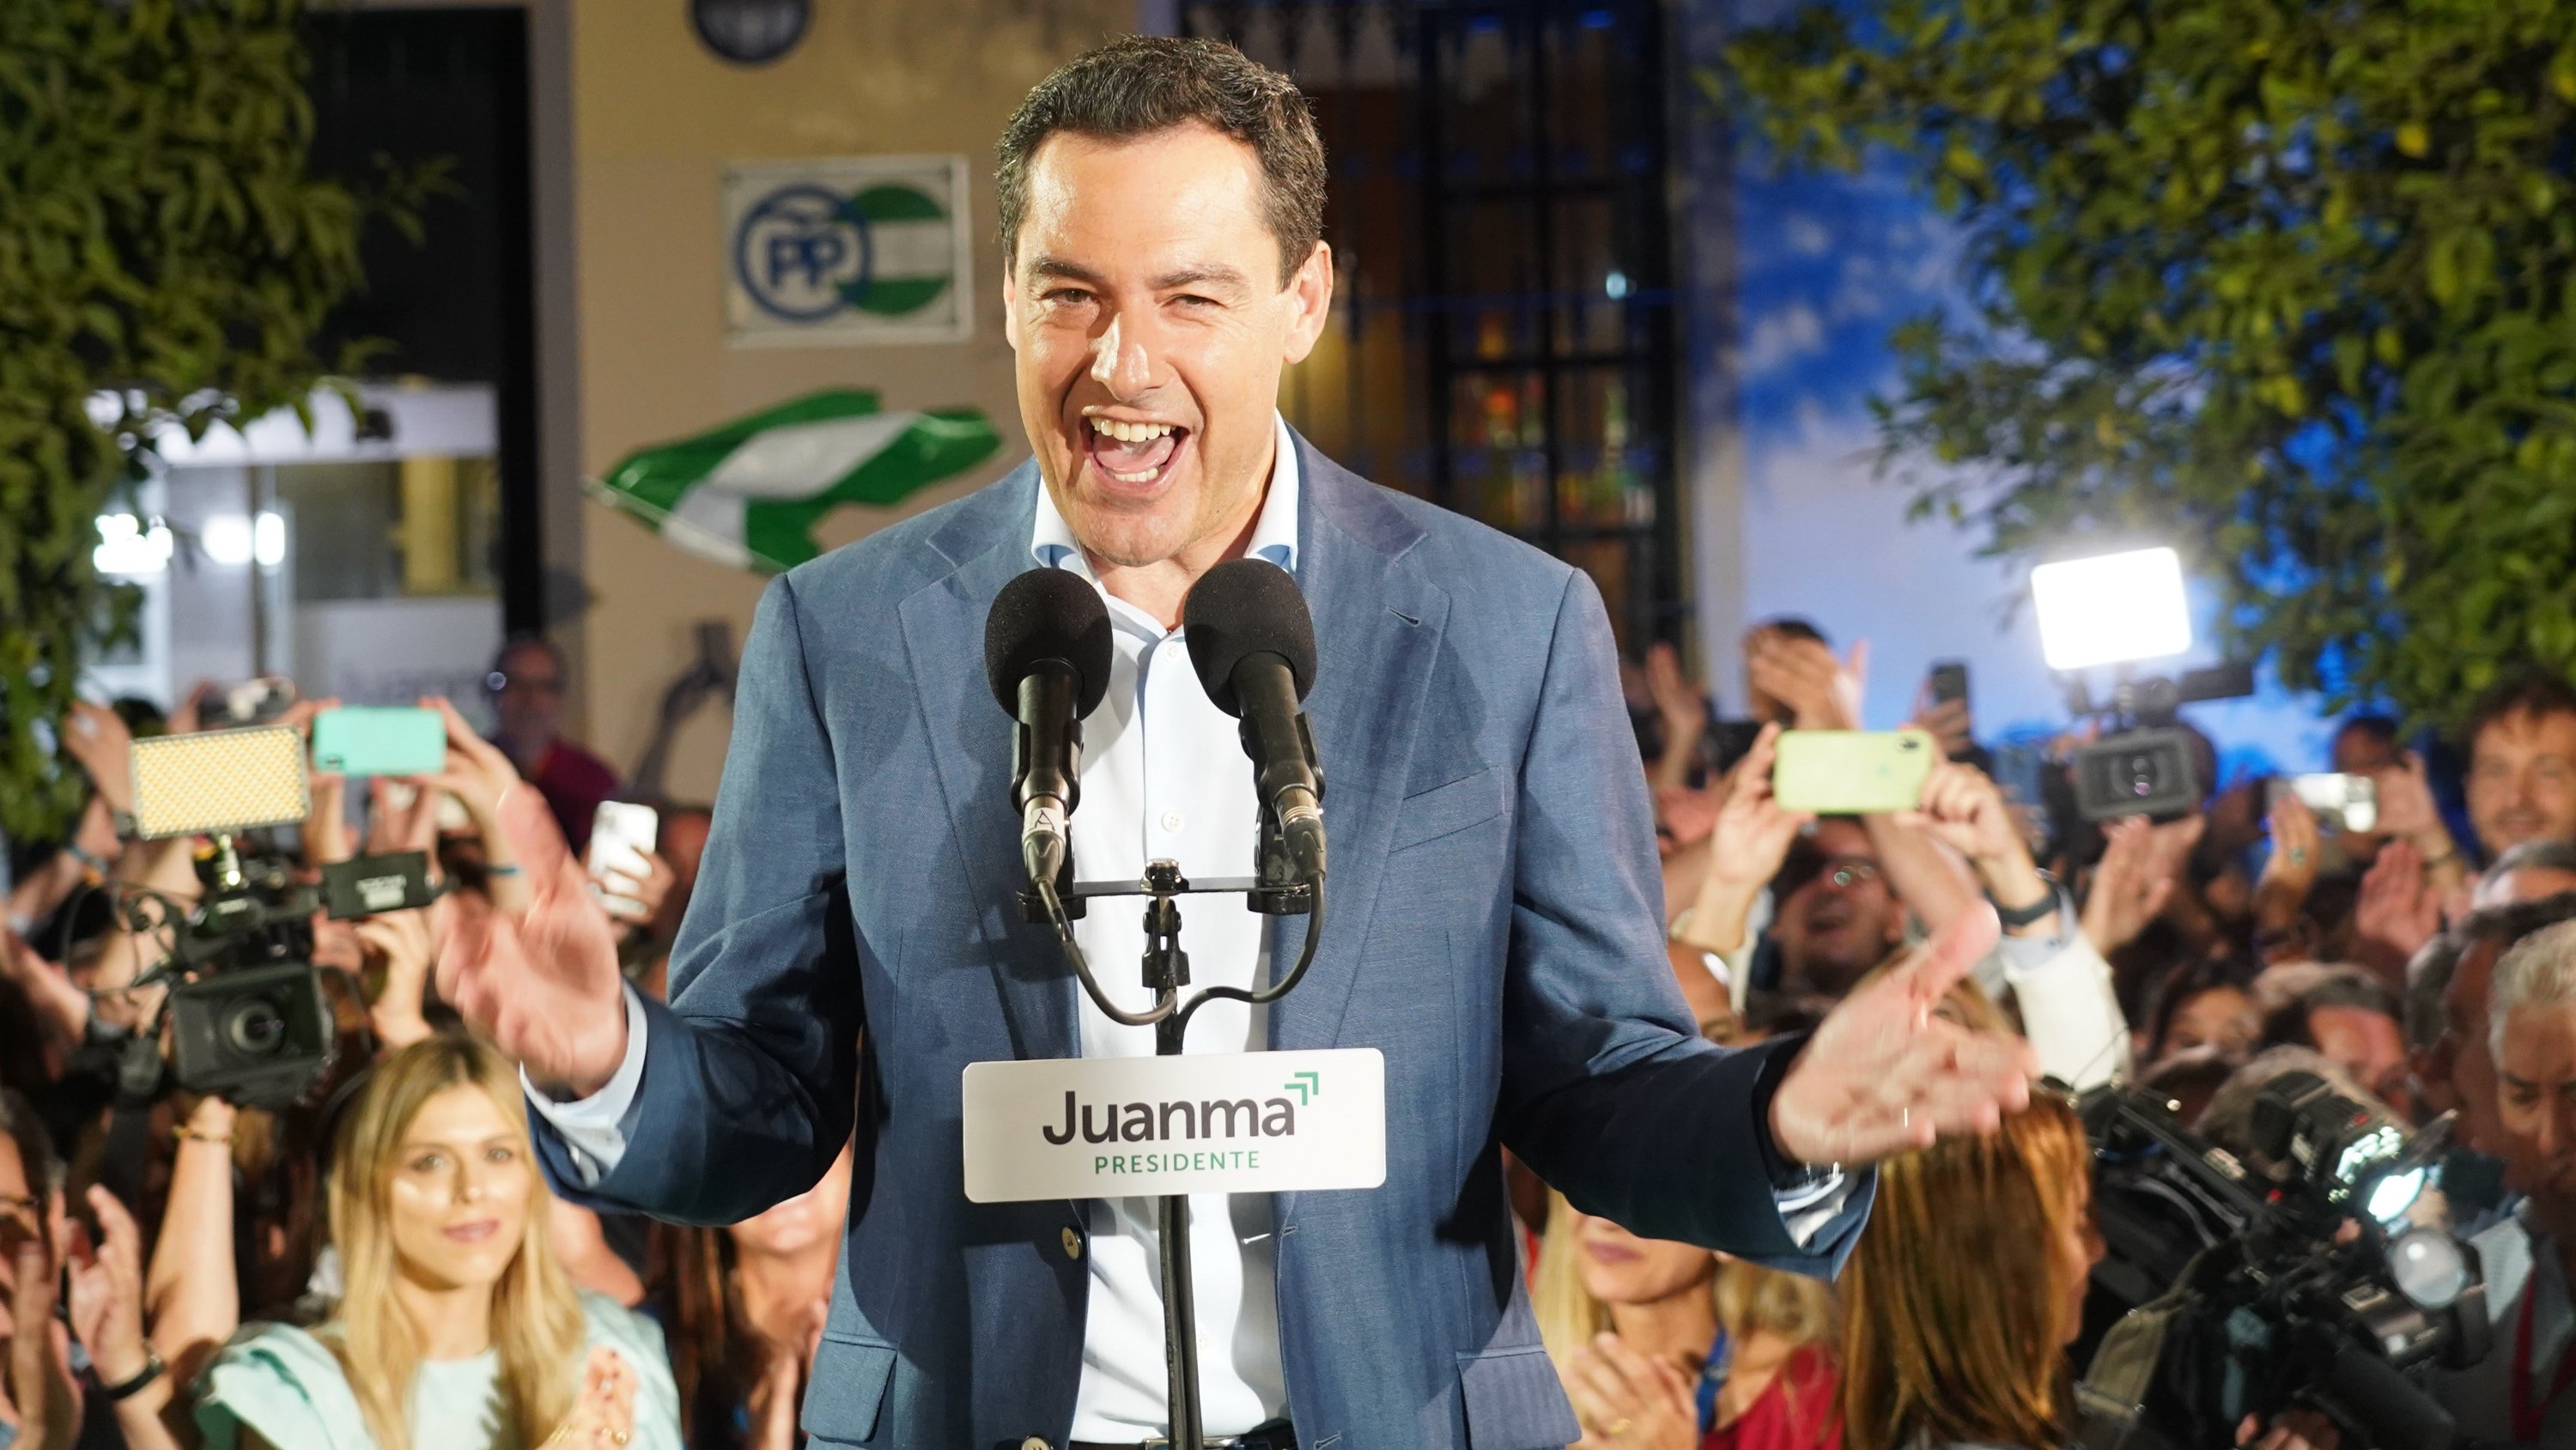 Juanma Moreno Winner Of The Andalusian Elections